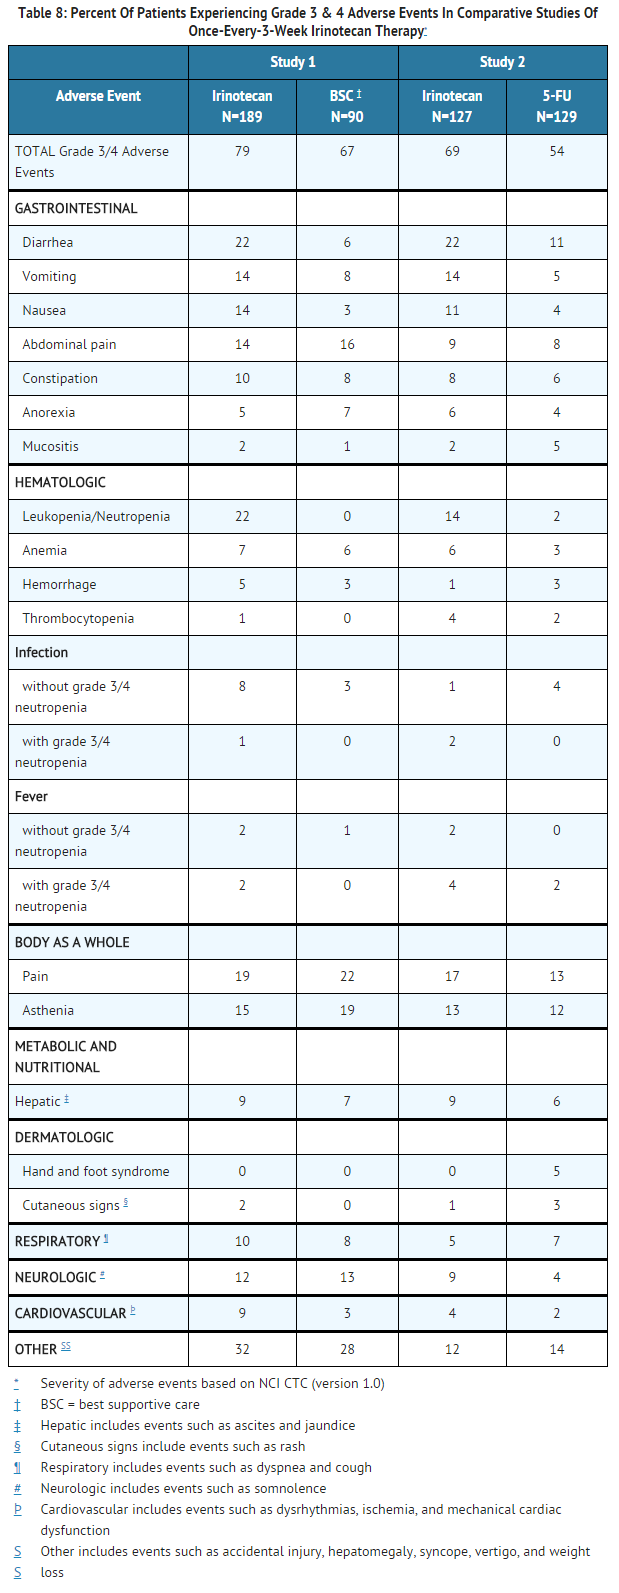 File:Adverse Events In Comparative Studies Of Once-Every-3-Week Irinotecan Therapy.png